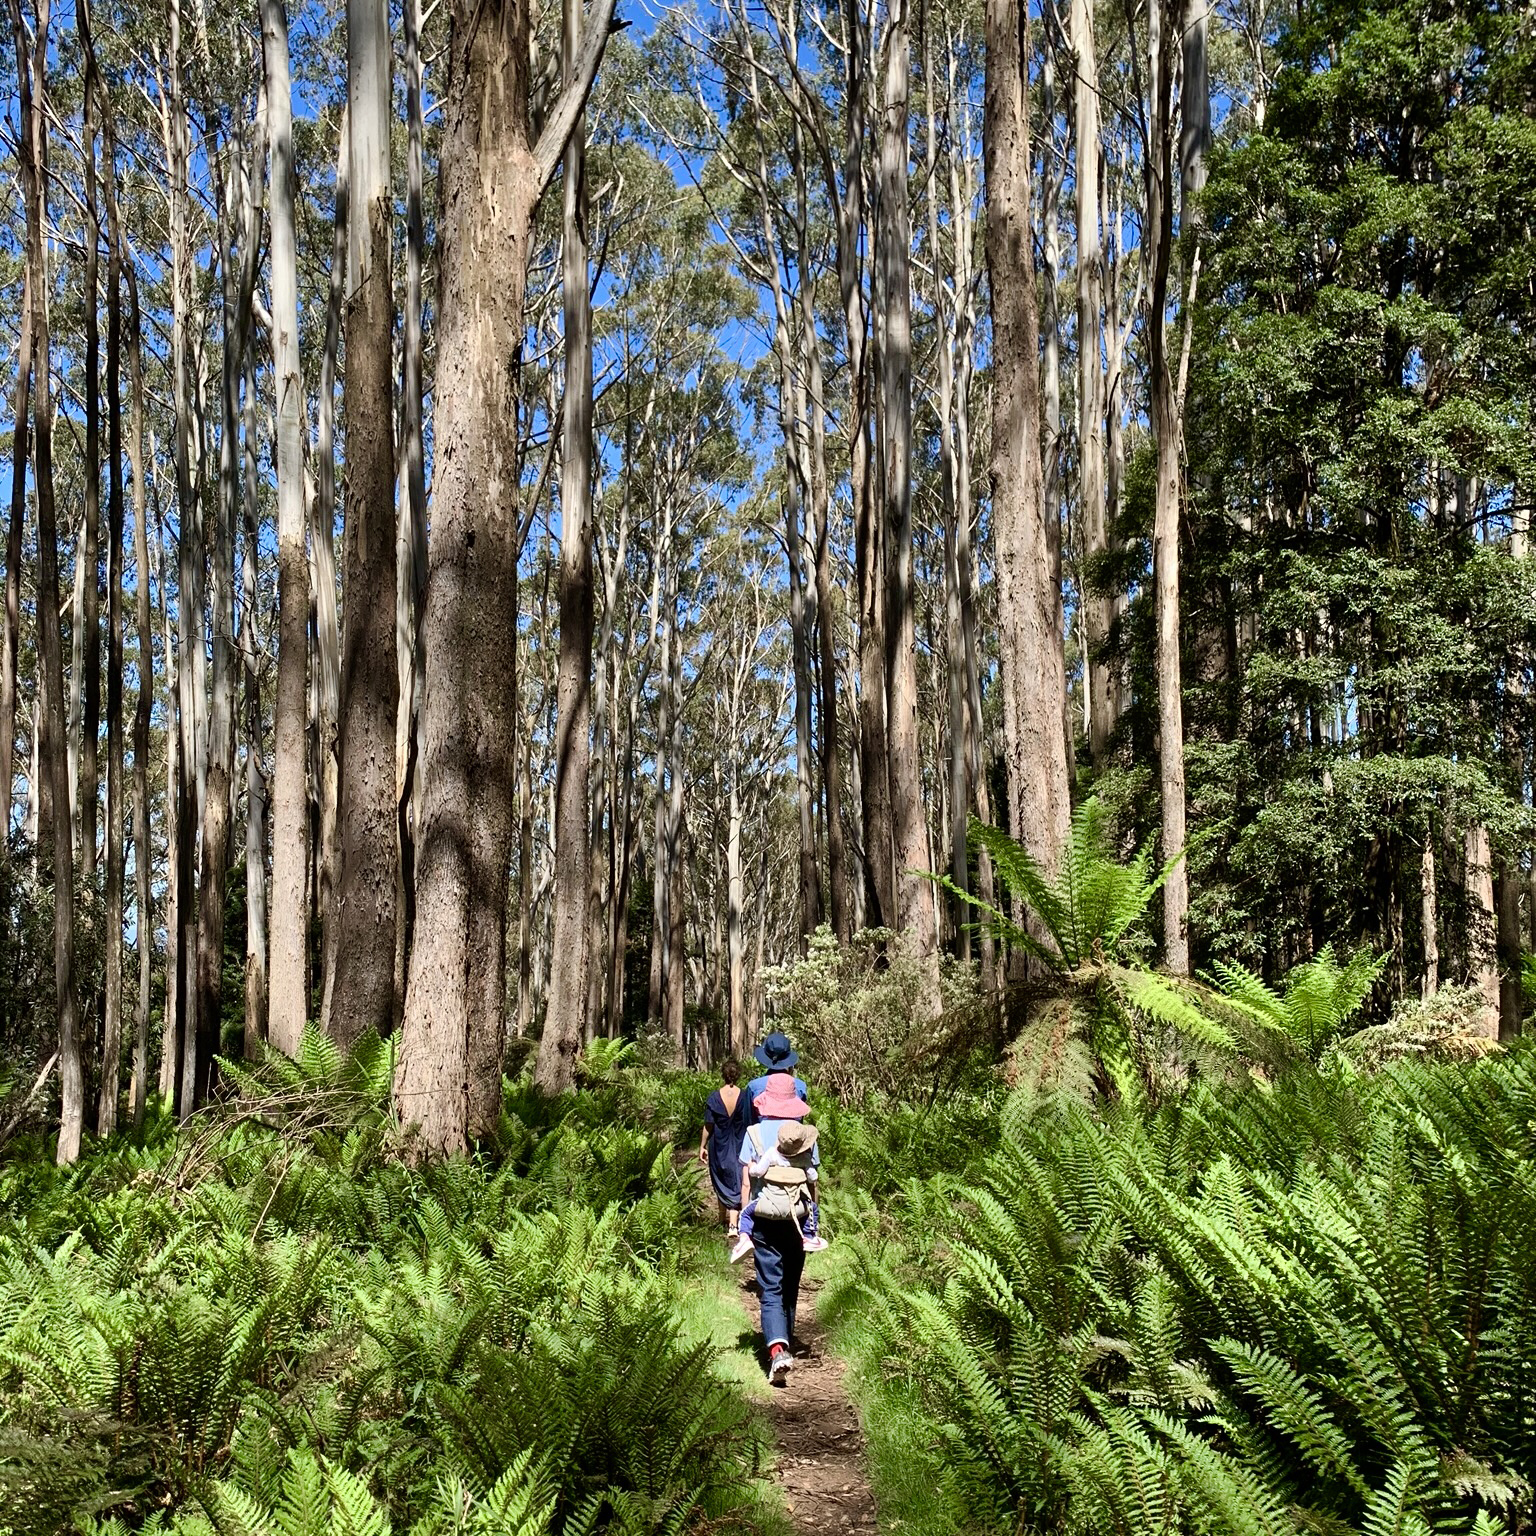 Four people walking in an Australian forest with ferns and gumtrees